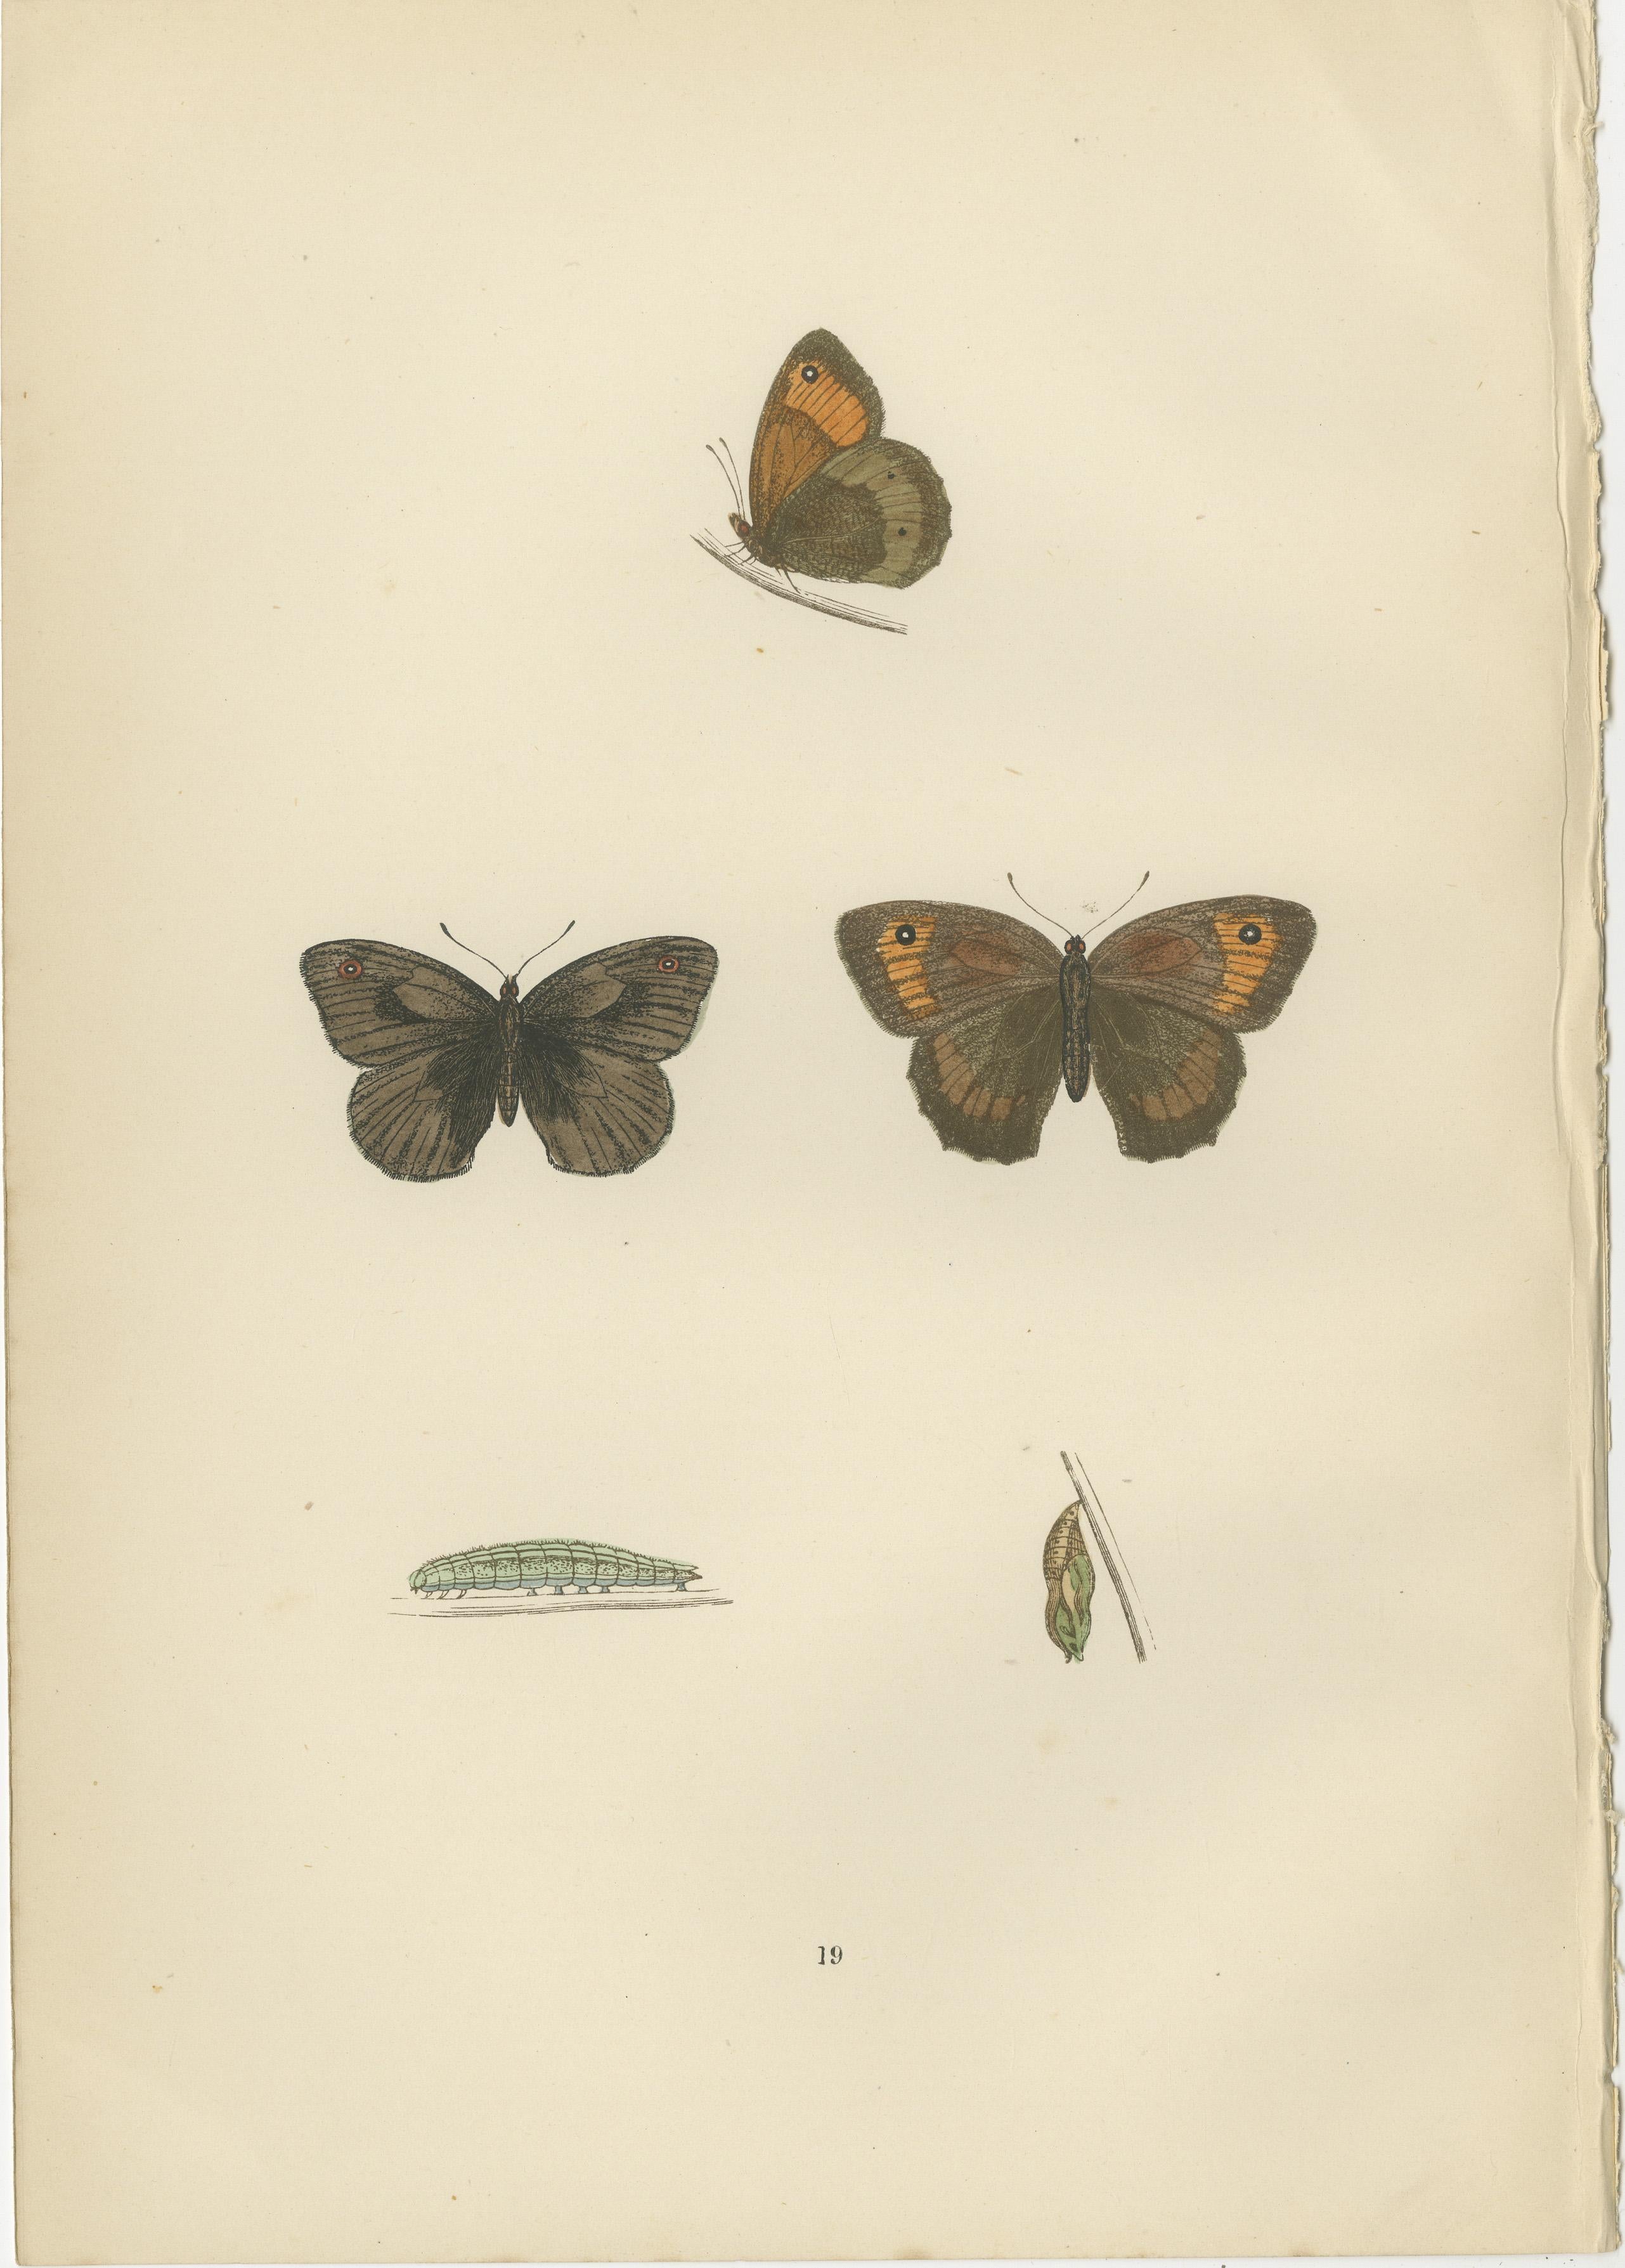 The butterflies presented in these hand-colored plates from the 1890 edition of 'A History of British Butterflies' by Morris include:

1. **Large Meadow Brown (likely Maniola jurtina)** - This butterfly typically showcases wings that are a rich,